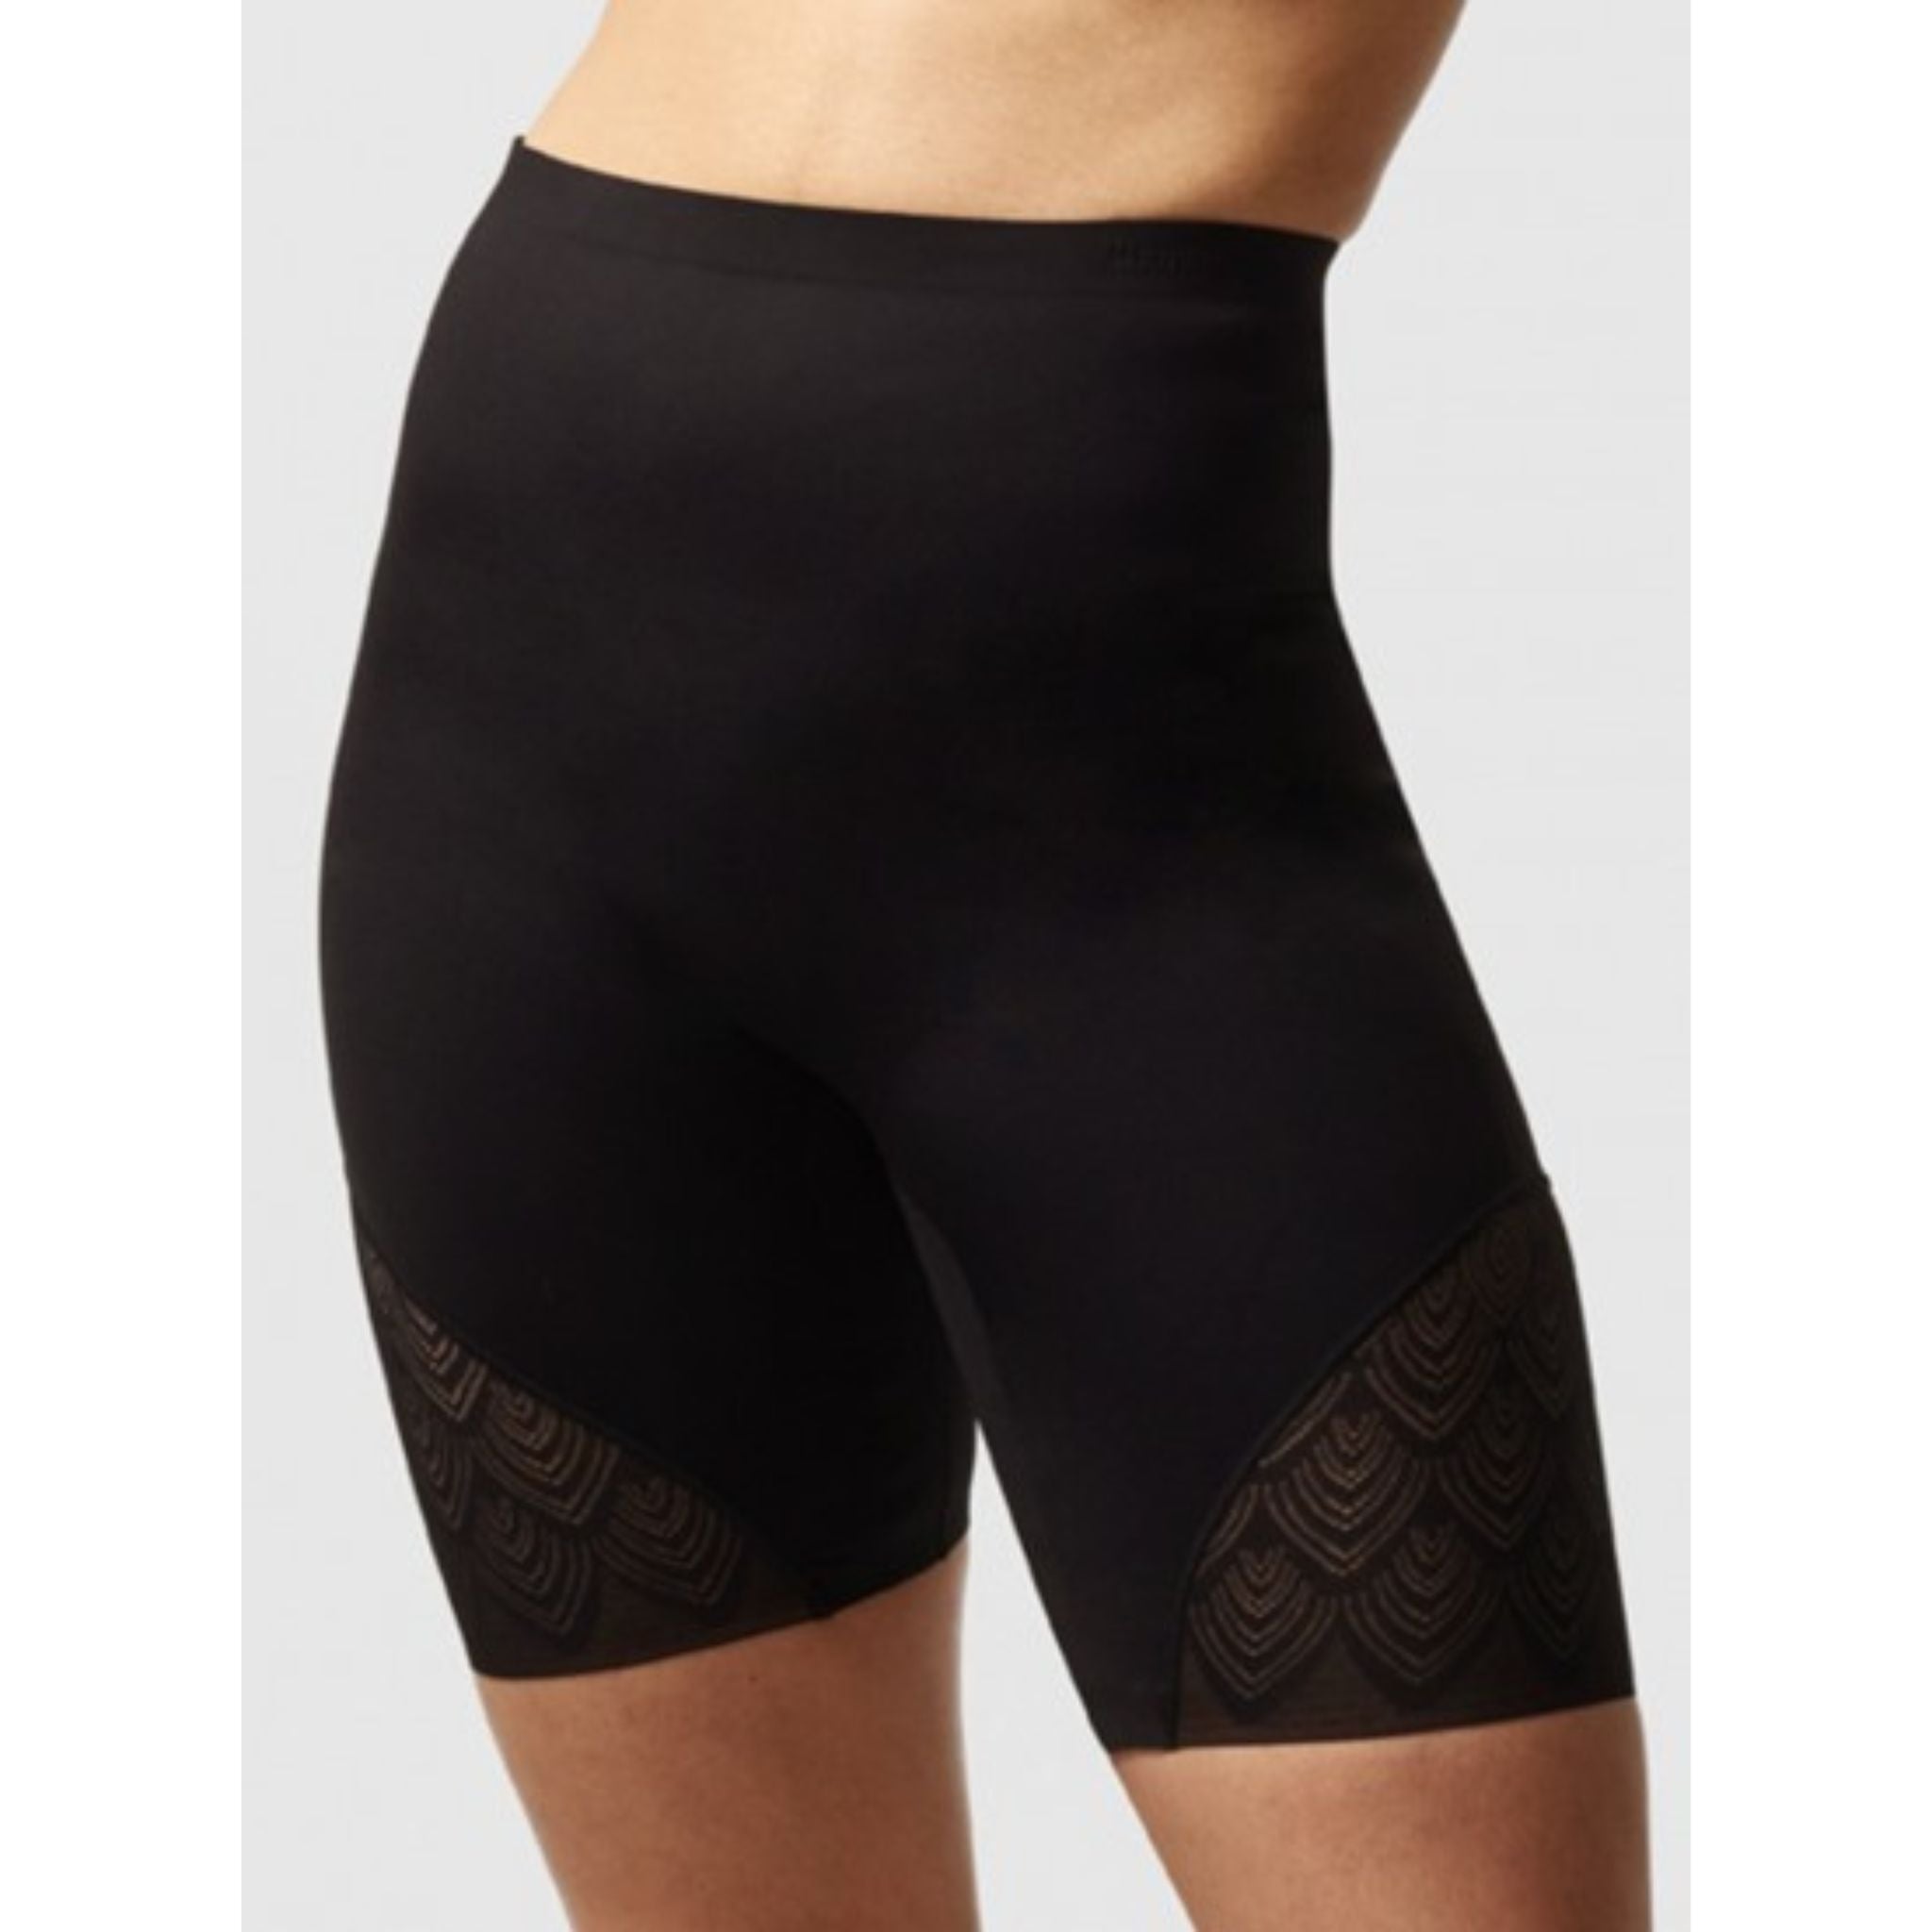 The Lace Shapewear High Waist Pant smoothes through the tummy, hips, and thighs refining your silhouette with a medium hold. Invisible and comfortable for daily wear thanks to the soft, stretch knit fabric with a no-dig waistband.